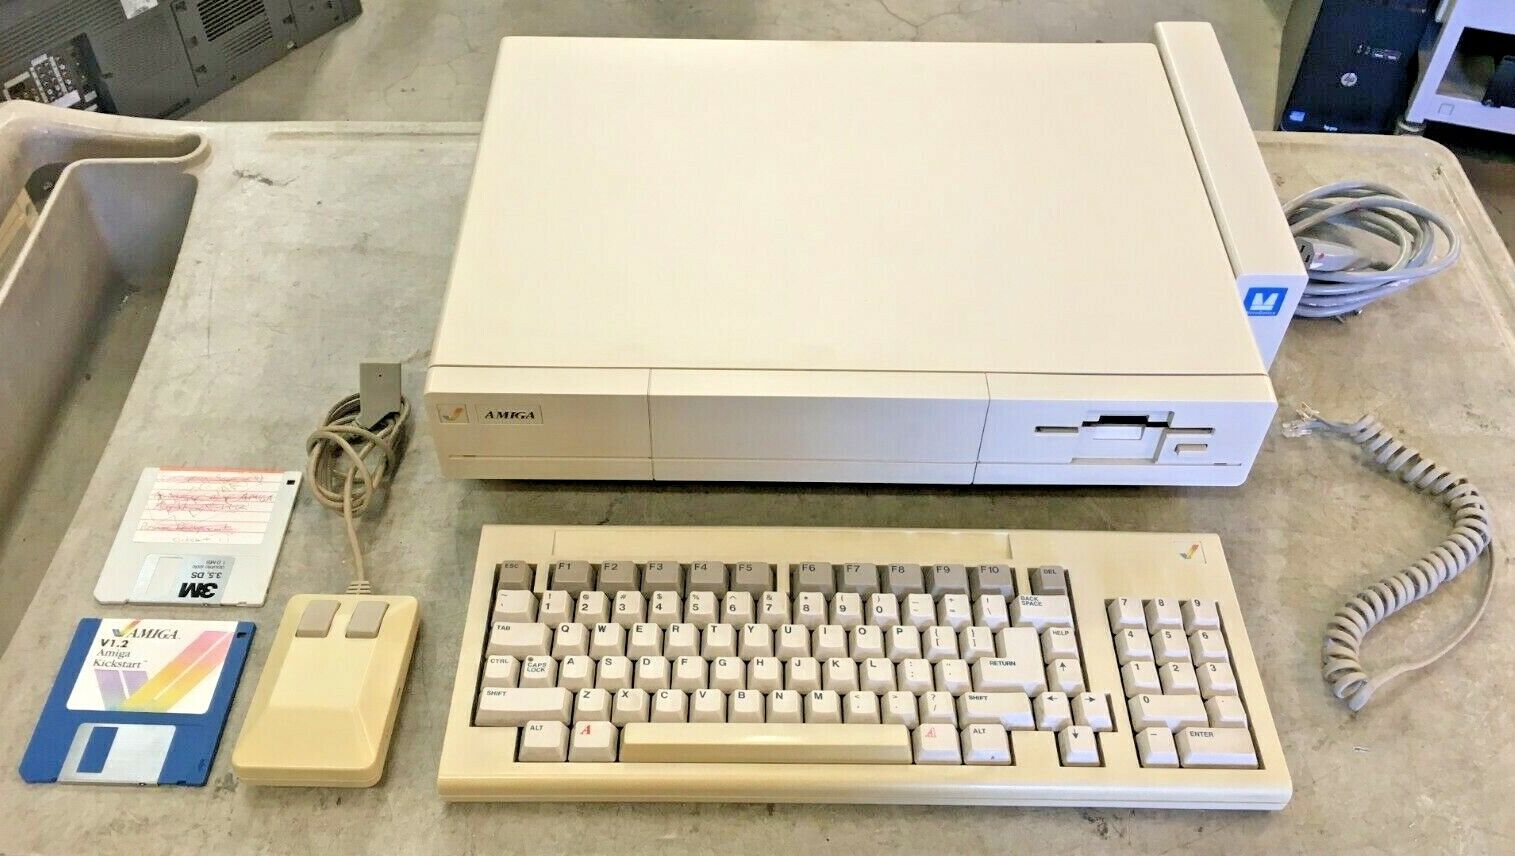 **Commodore Amiga 1000 Computer w/ Keyboard, Mouse and Starboard 2 Expansion**